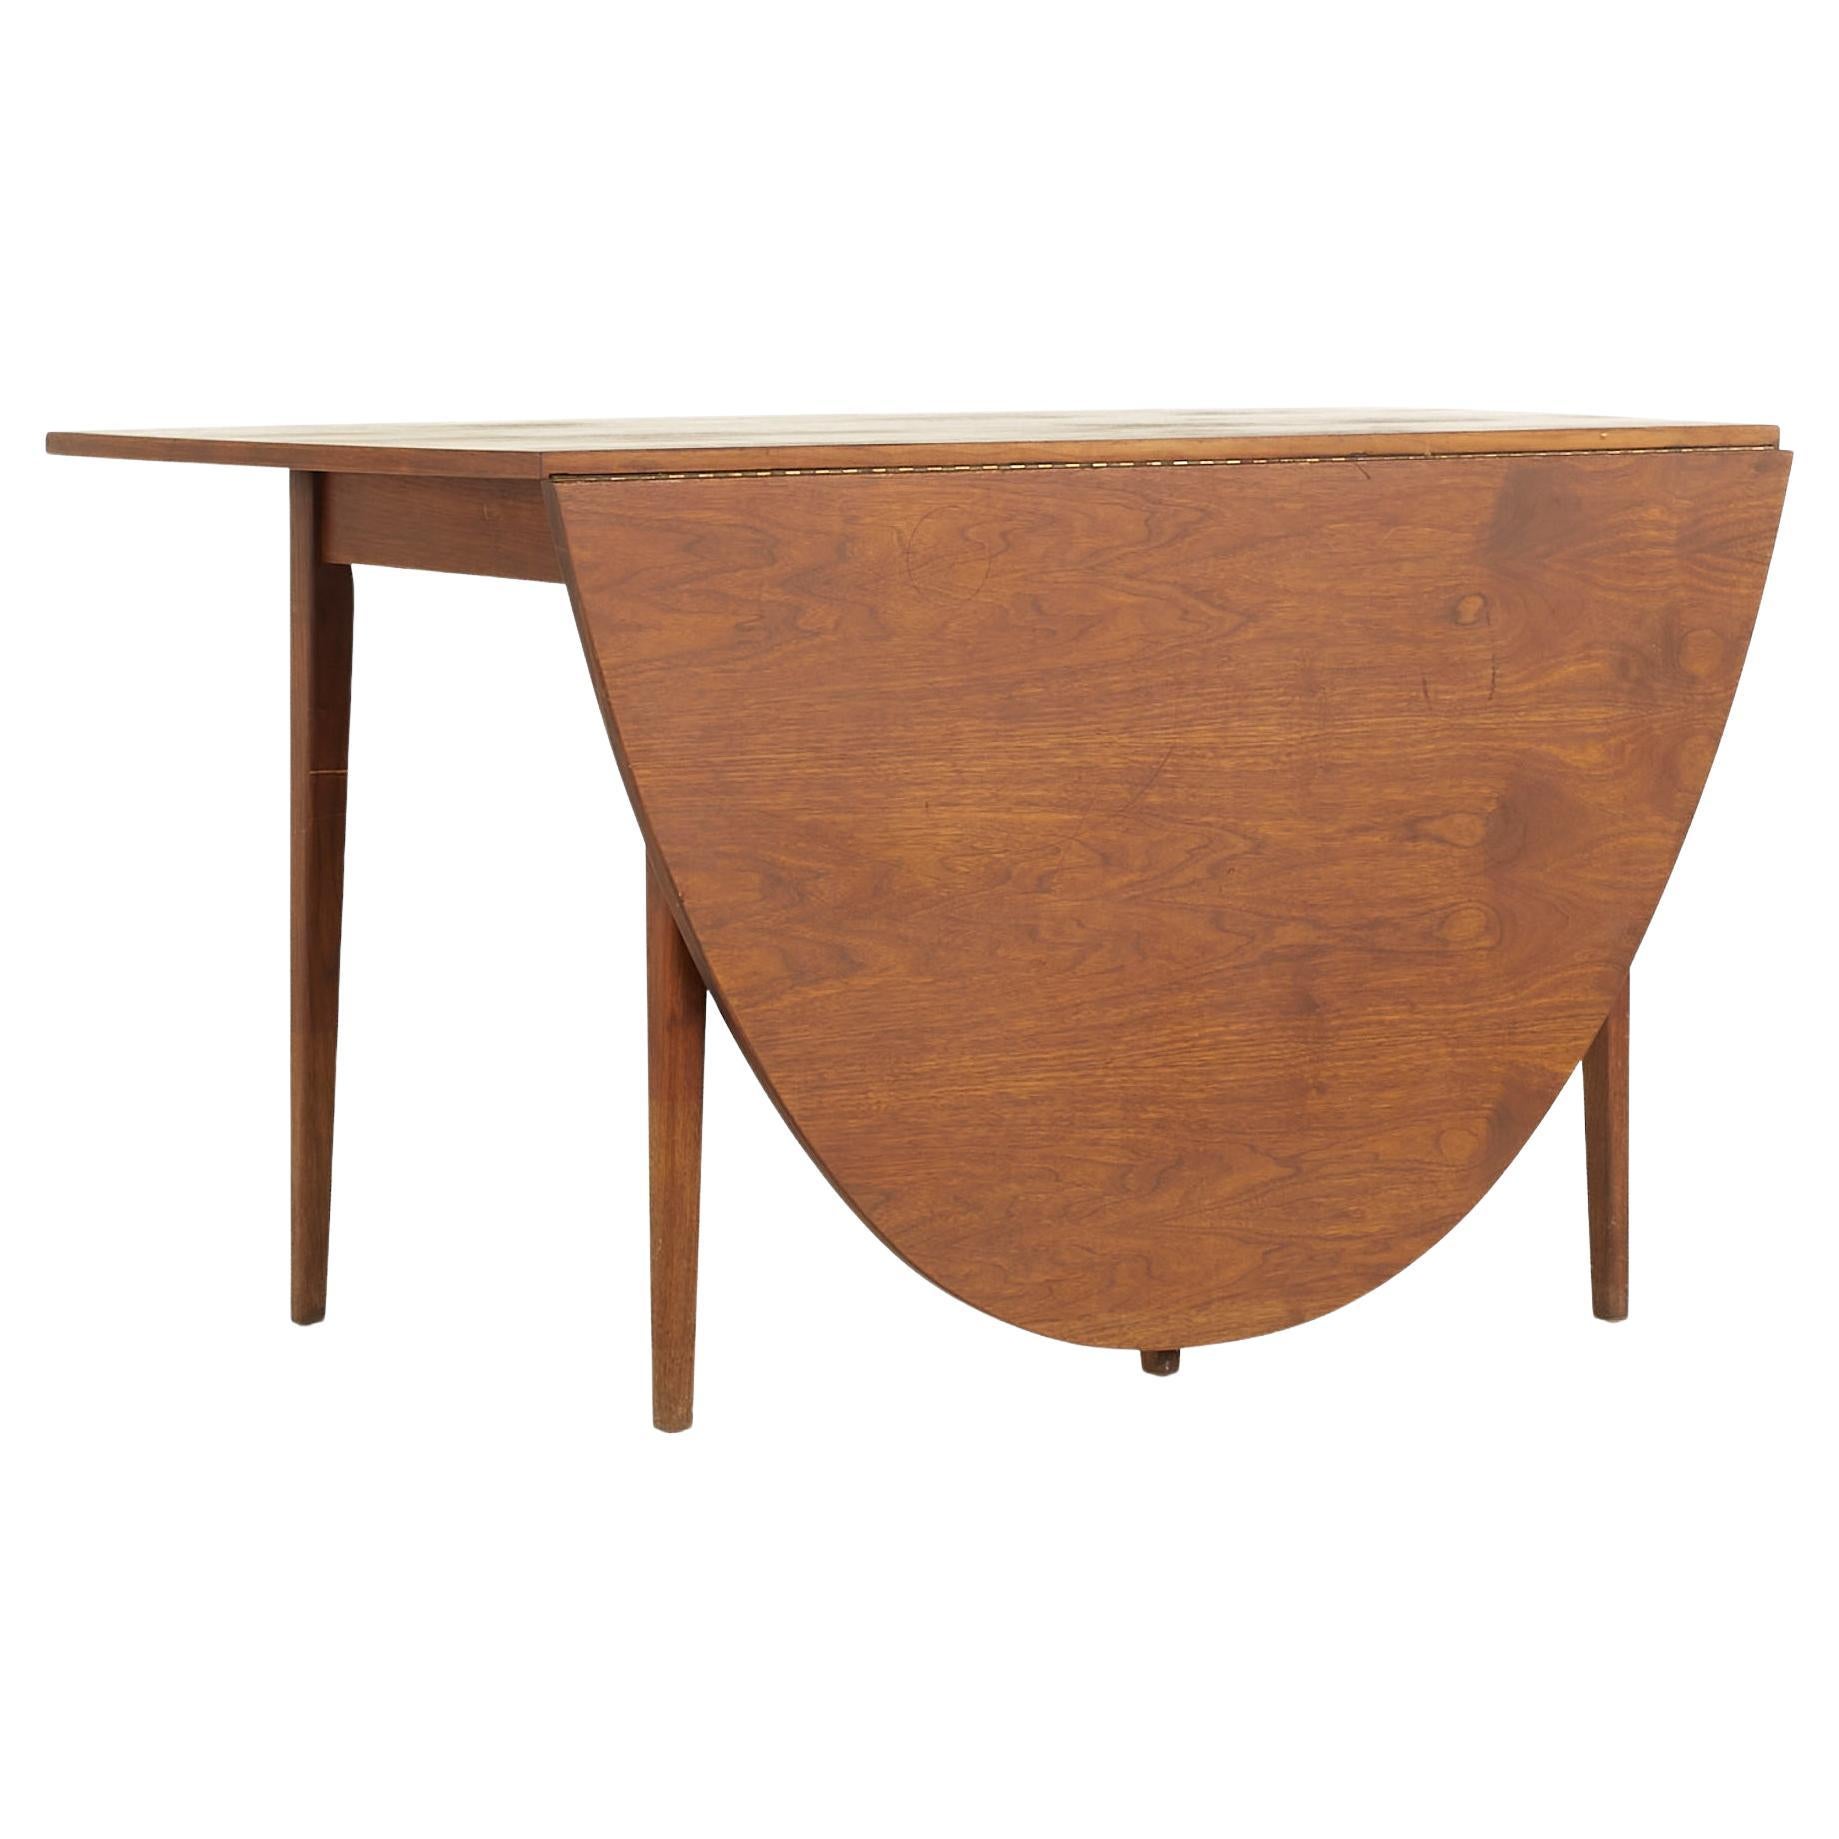 Jack Cartwright for Founders Mid Century Walnut Drop Leaf Dining Table For Sale